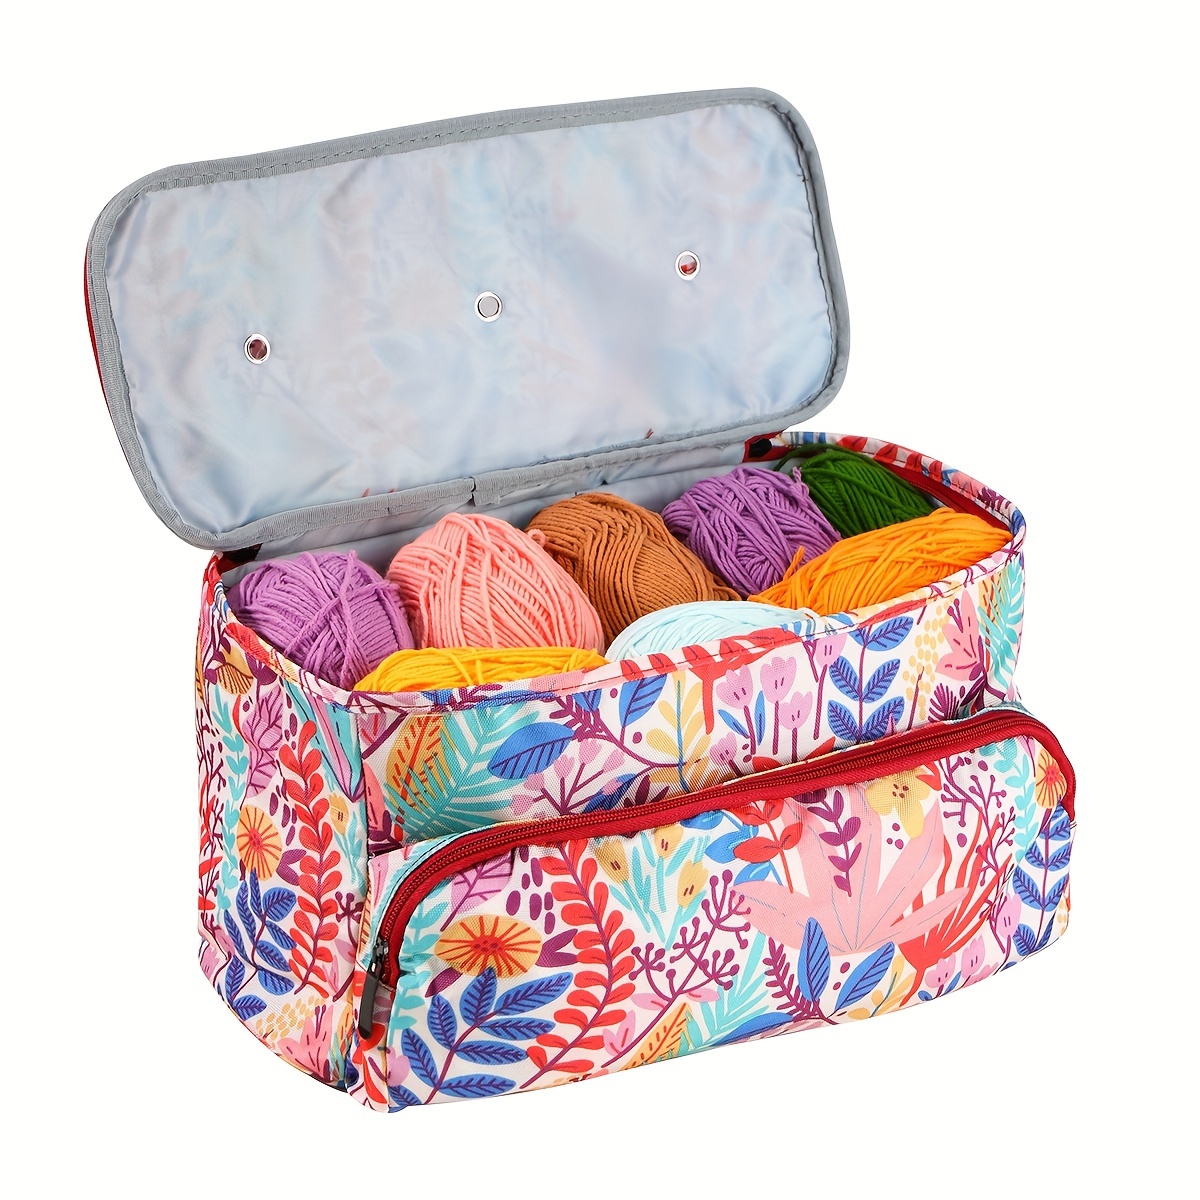 

Large Floral Knitting Tote Bag - Waterproof Yarn Storage Organizer With Crochet Hook & Needle Holder, Portable Sewing Accessory Case